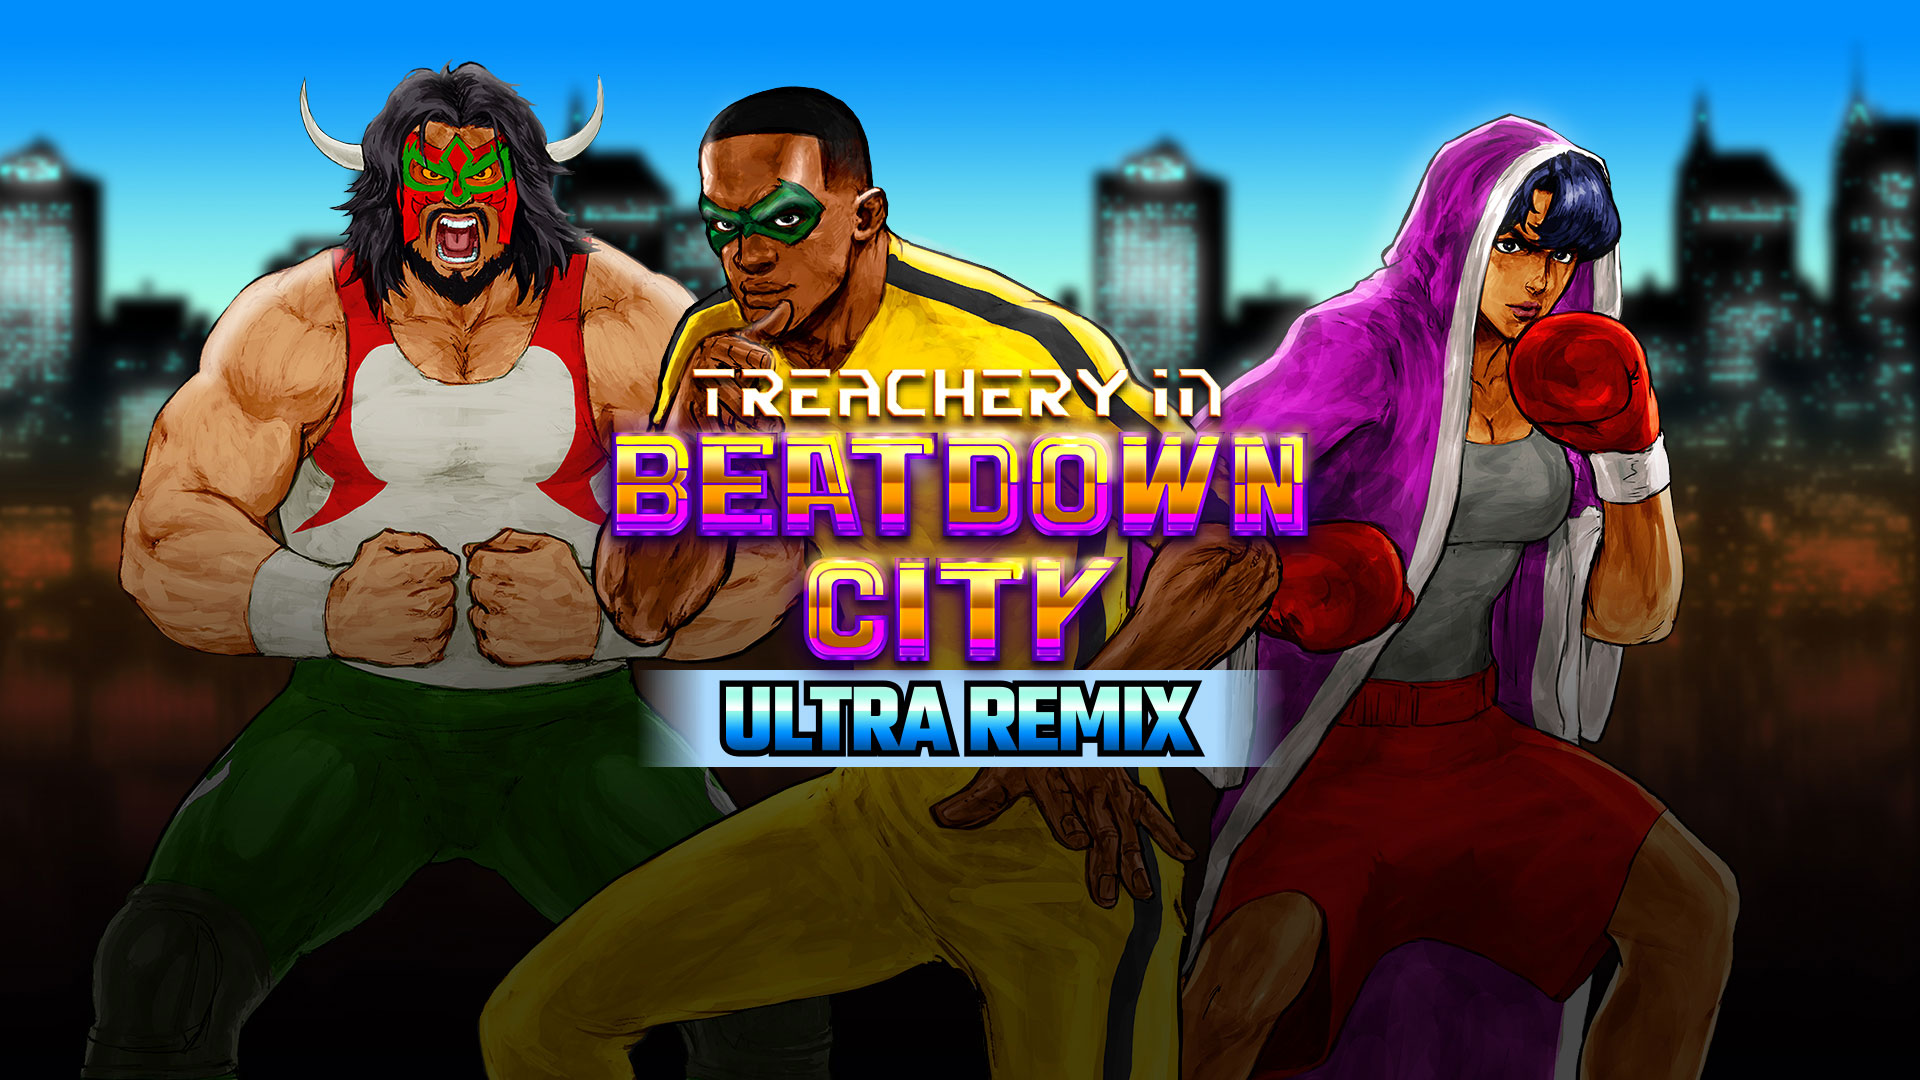 Treachery in Beatdown City: Ultra Remix is Coming to Xbox on April 27th